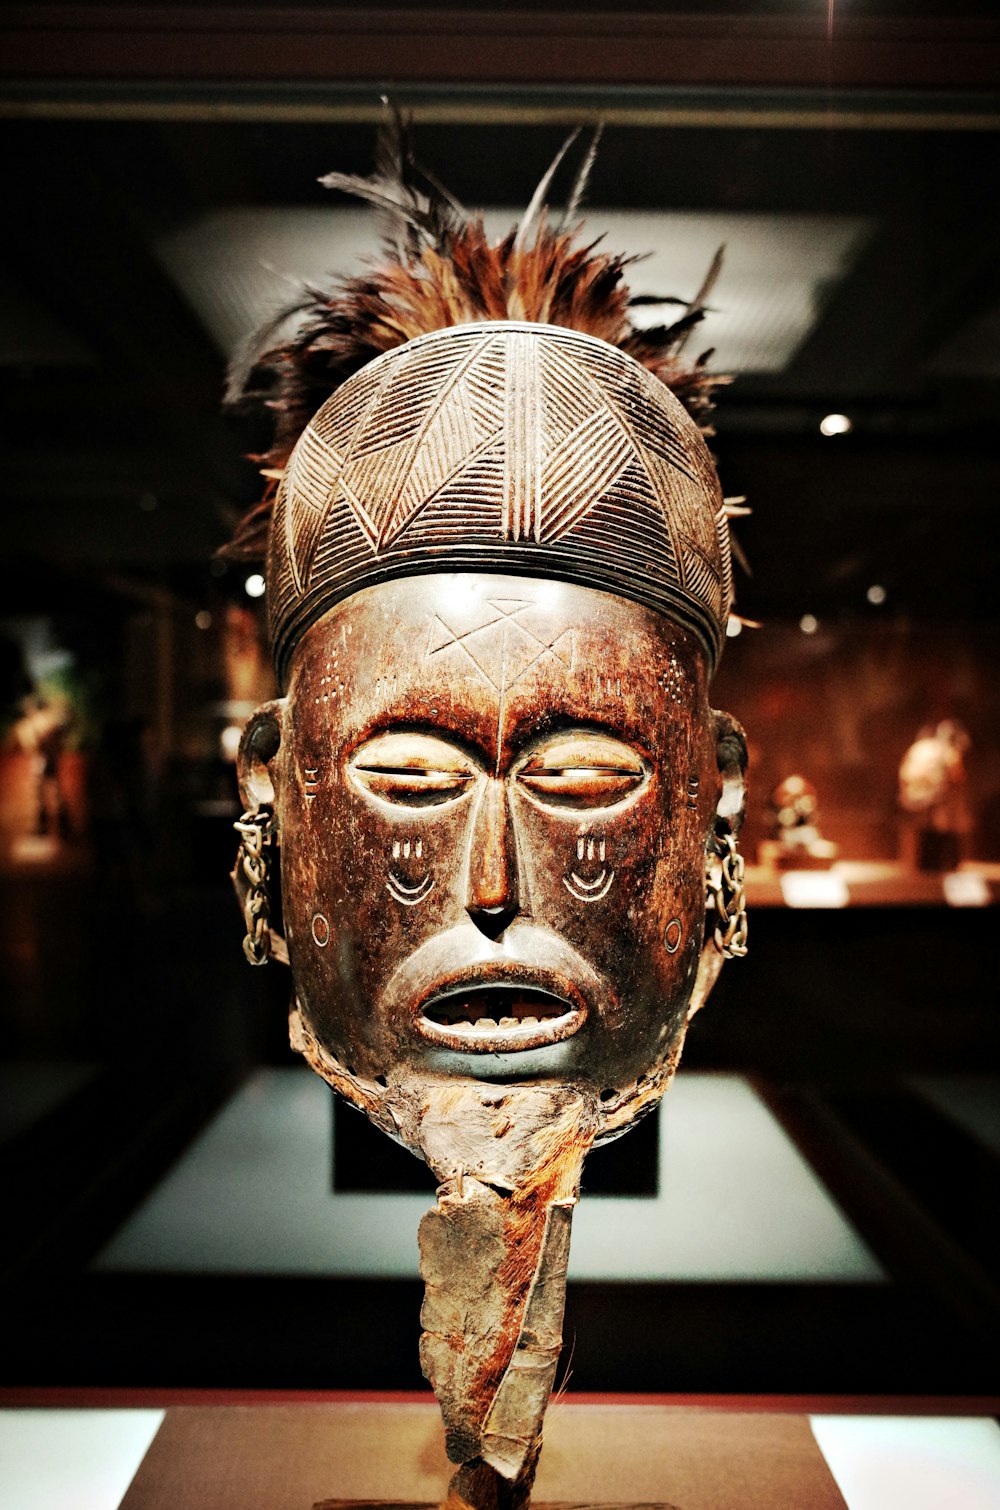 a wooden mask on display in a museum